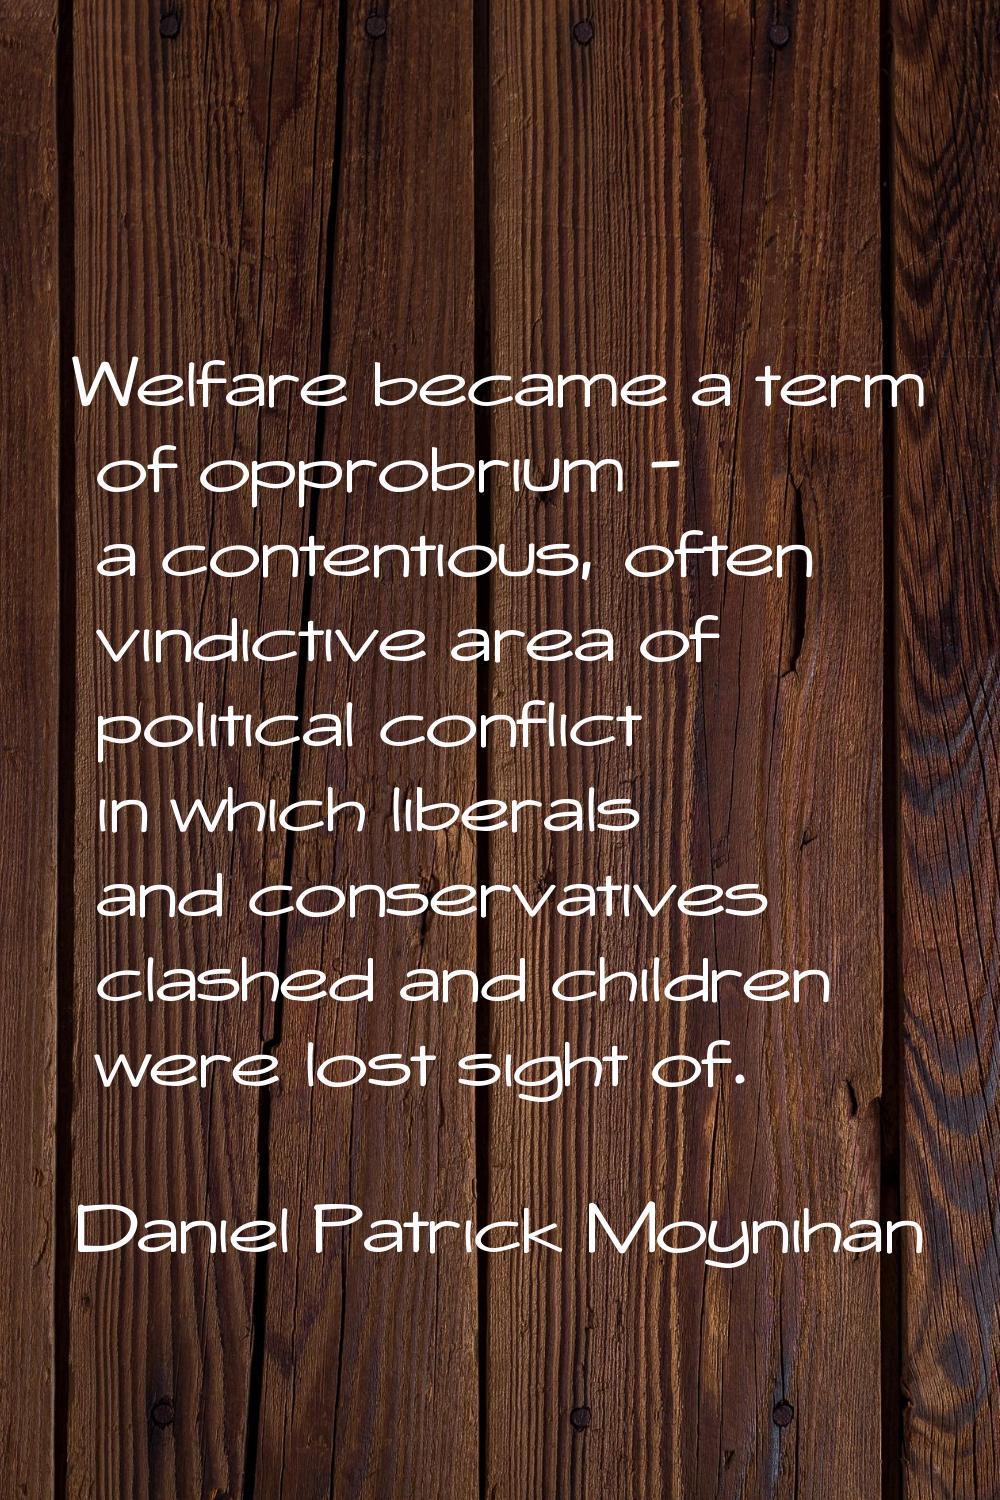 Welfare became a term of opprobrium - a contentious, often vindictive area of political conflict in